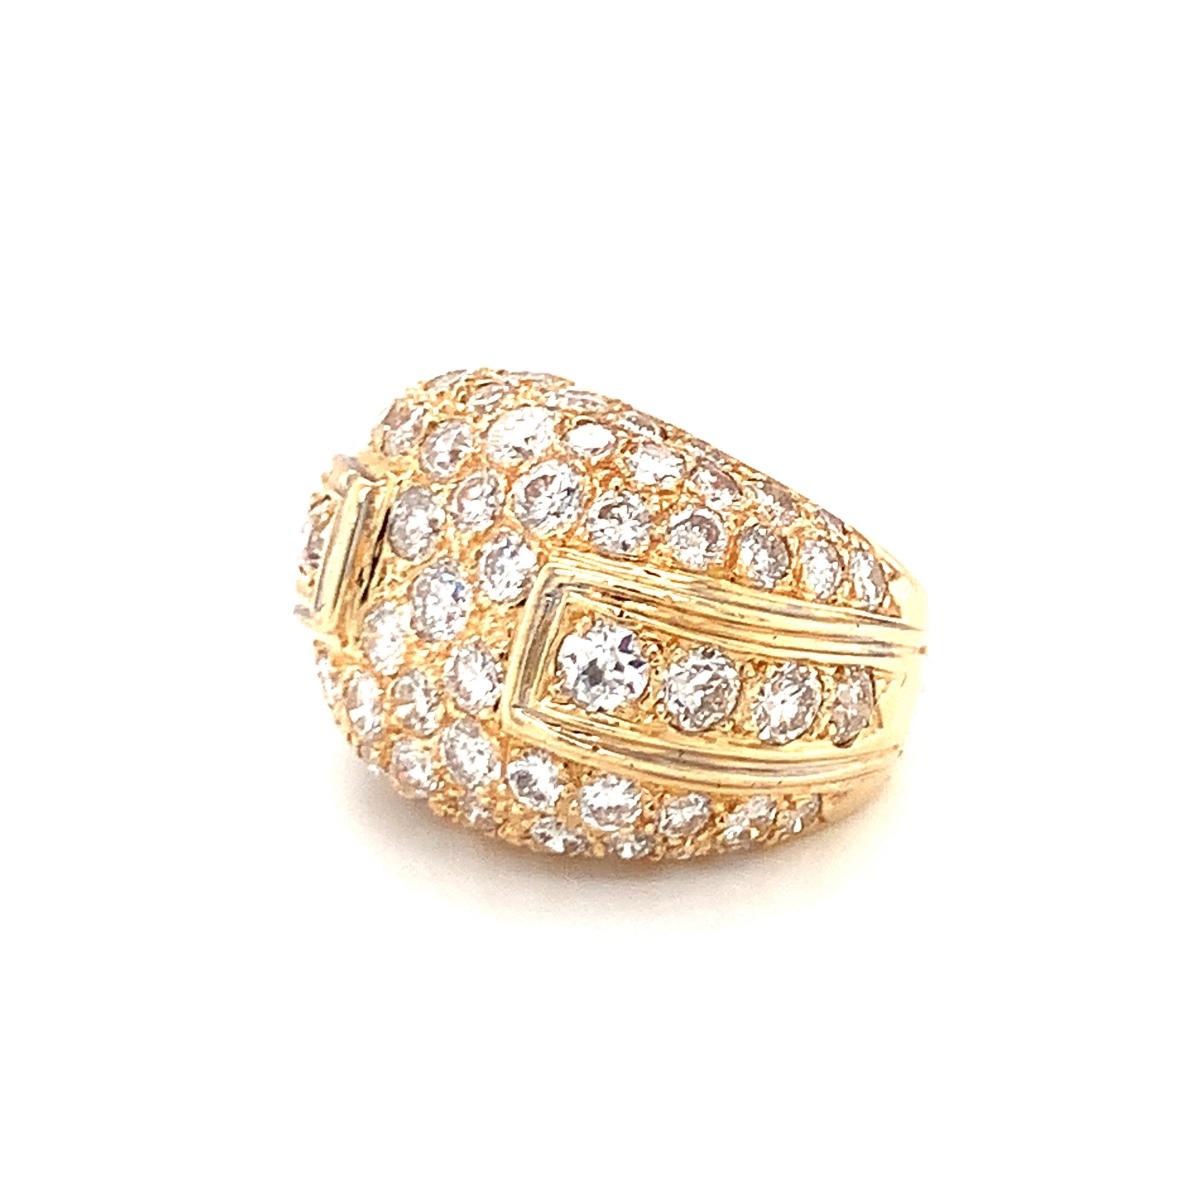 Pave Diamond Bombe 14K Yellow Gold Ring, circa 1970s For Sale 1